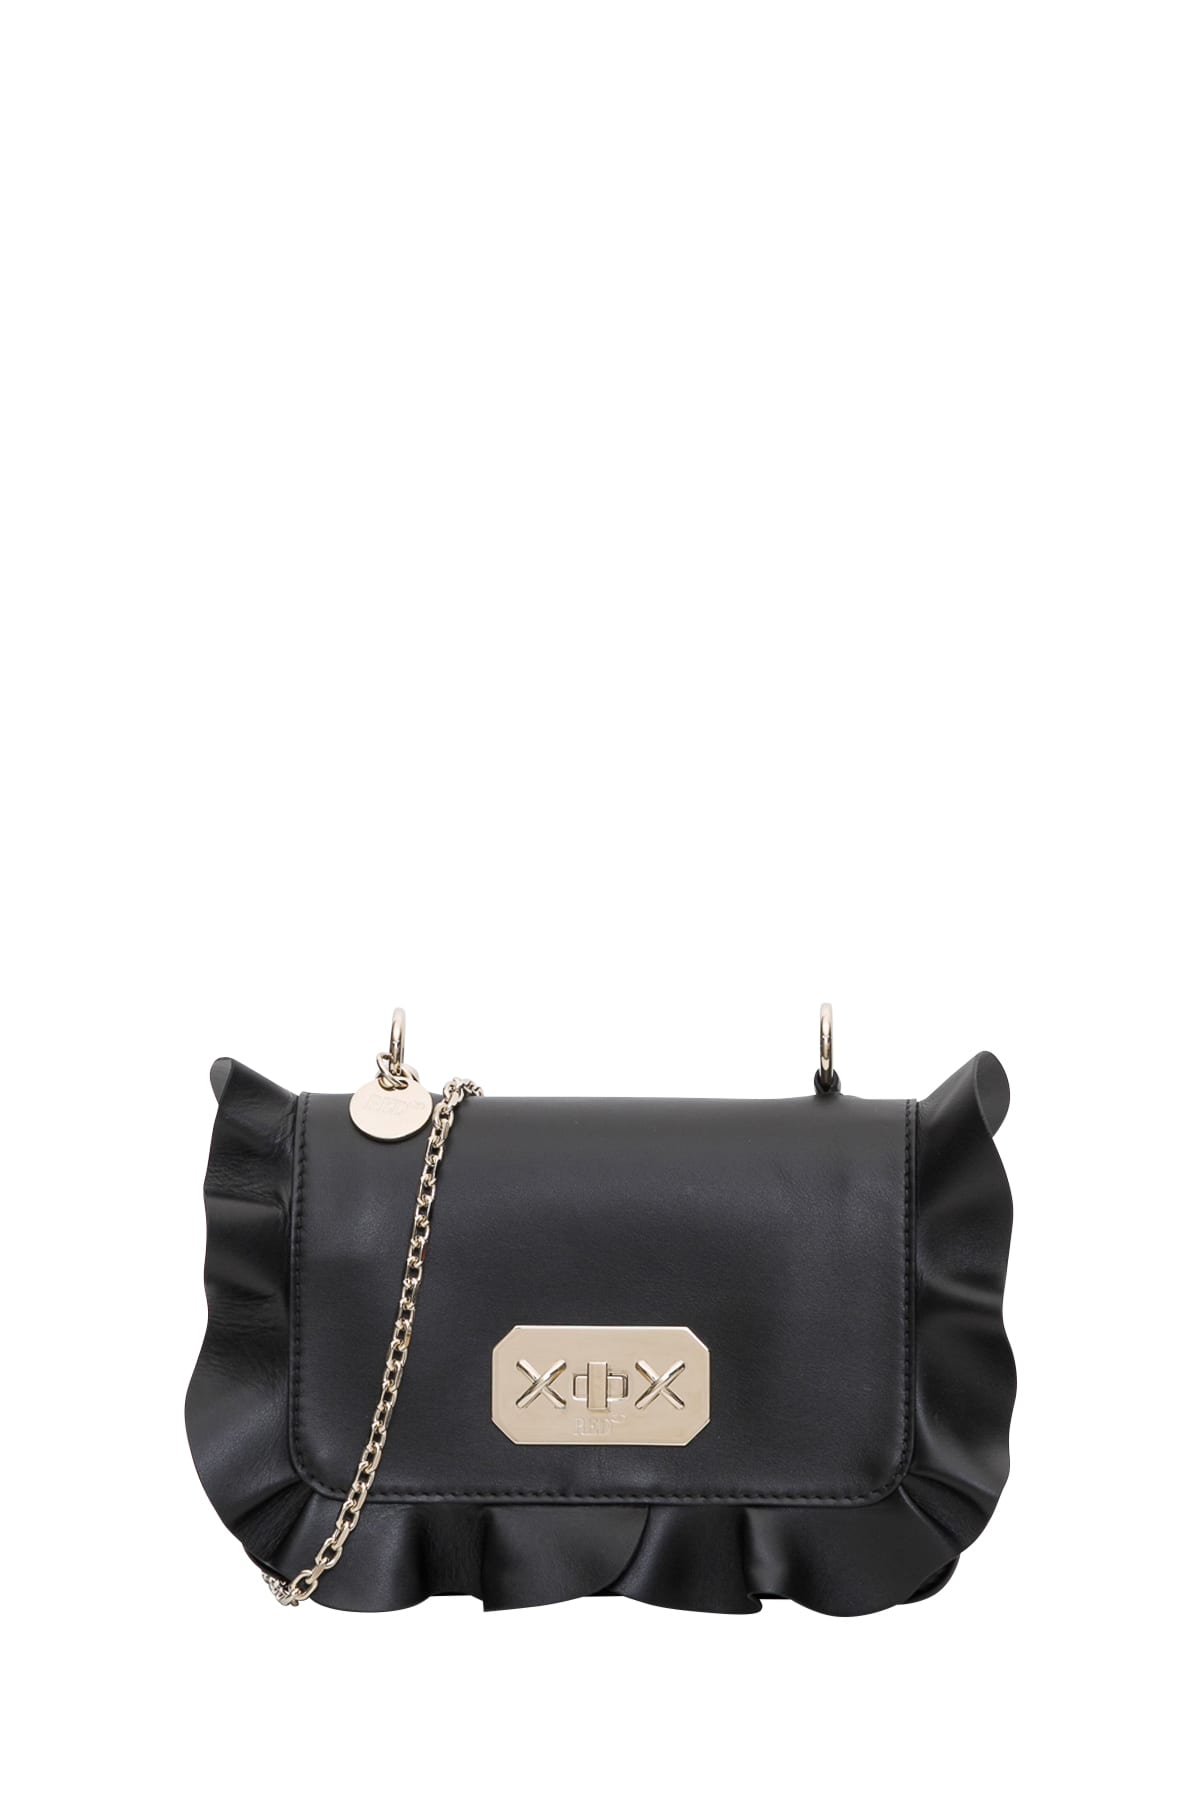 RED VALENTINO CORSSBODY BAG WITH RUFFLES PIPING,11212953